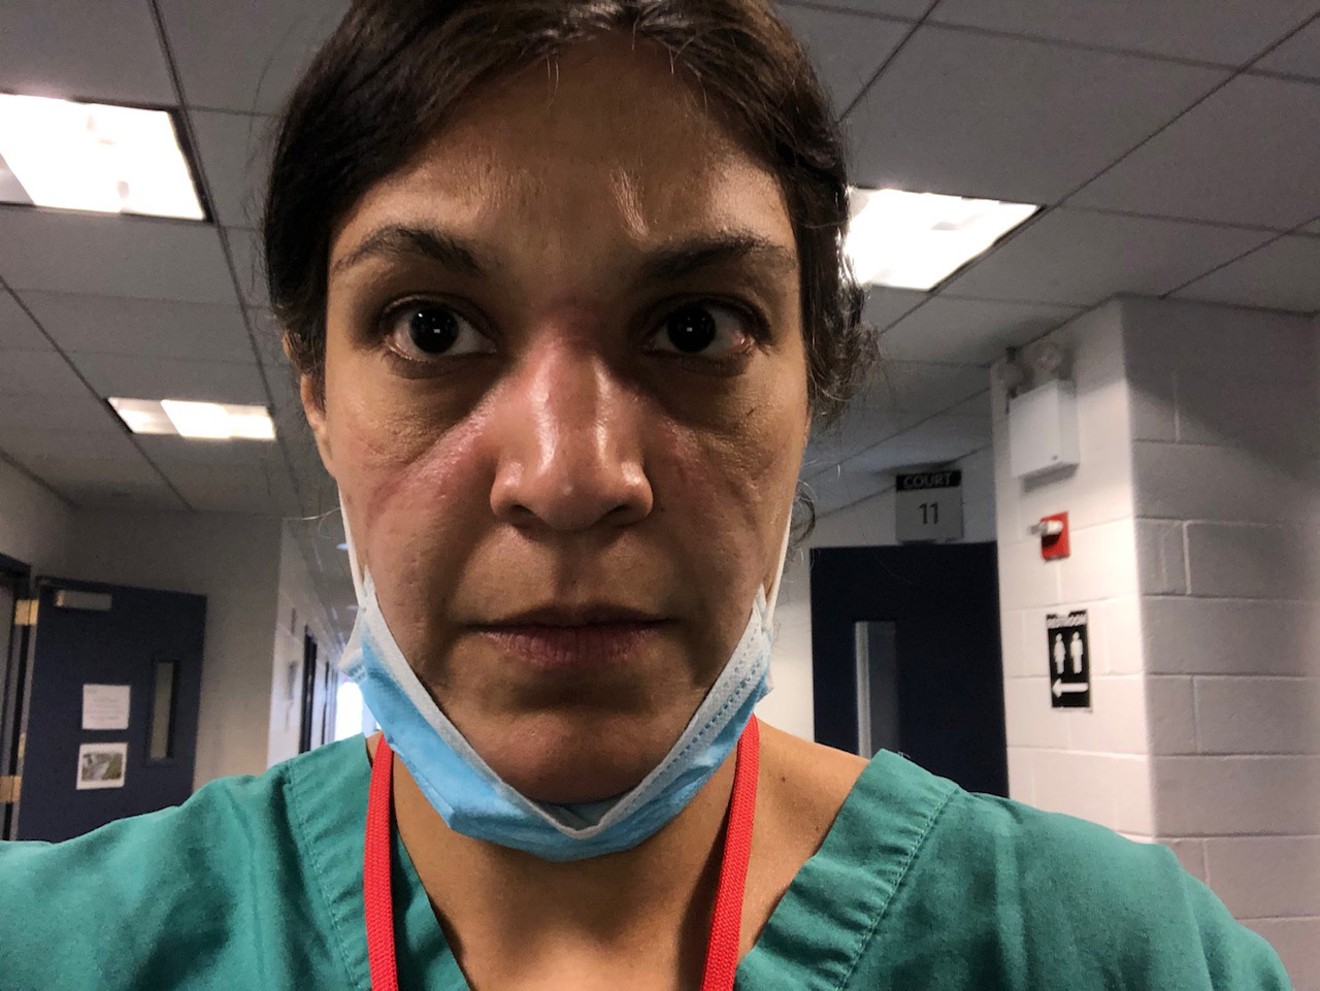 Dr. Comilla Sasson thought she had seen it all in the emergency room.